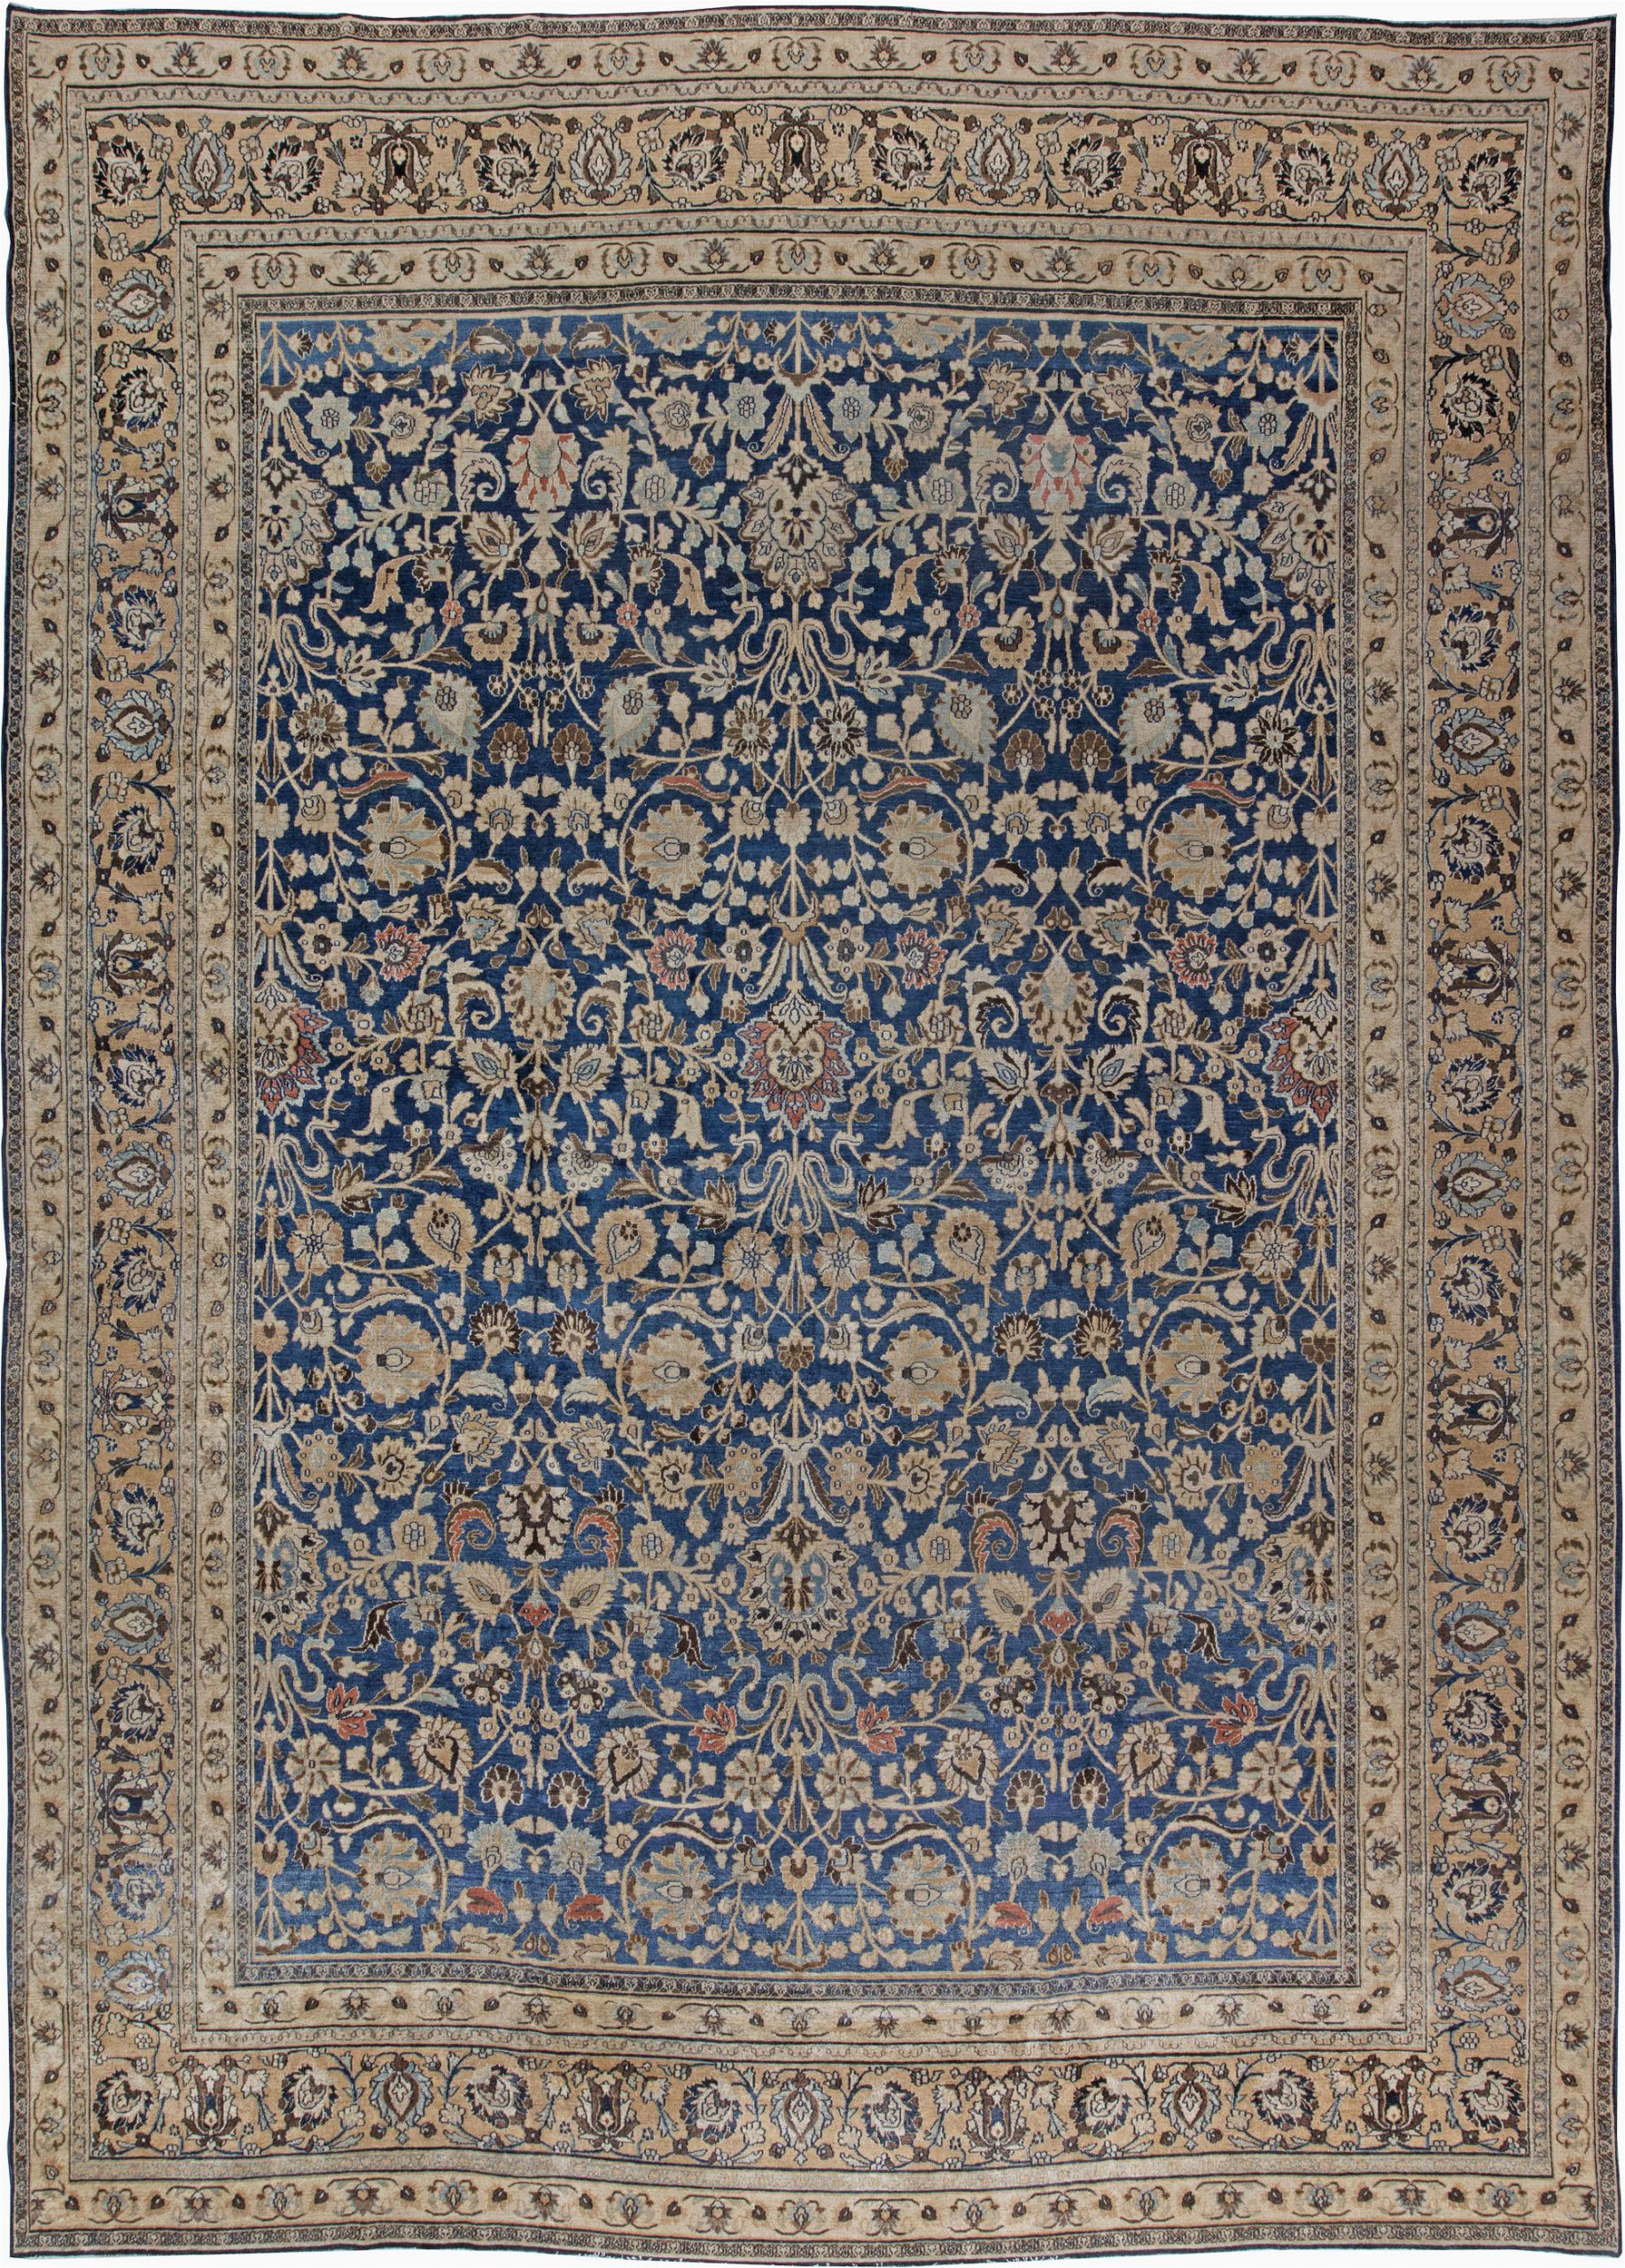 Blue and White Persian Rug Green White and Blue Persian Rugs